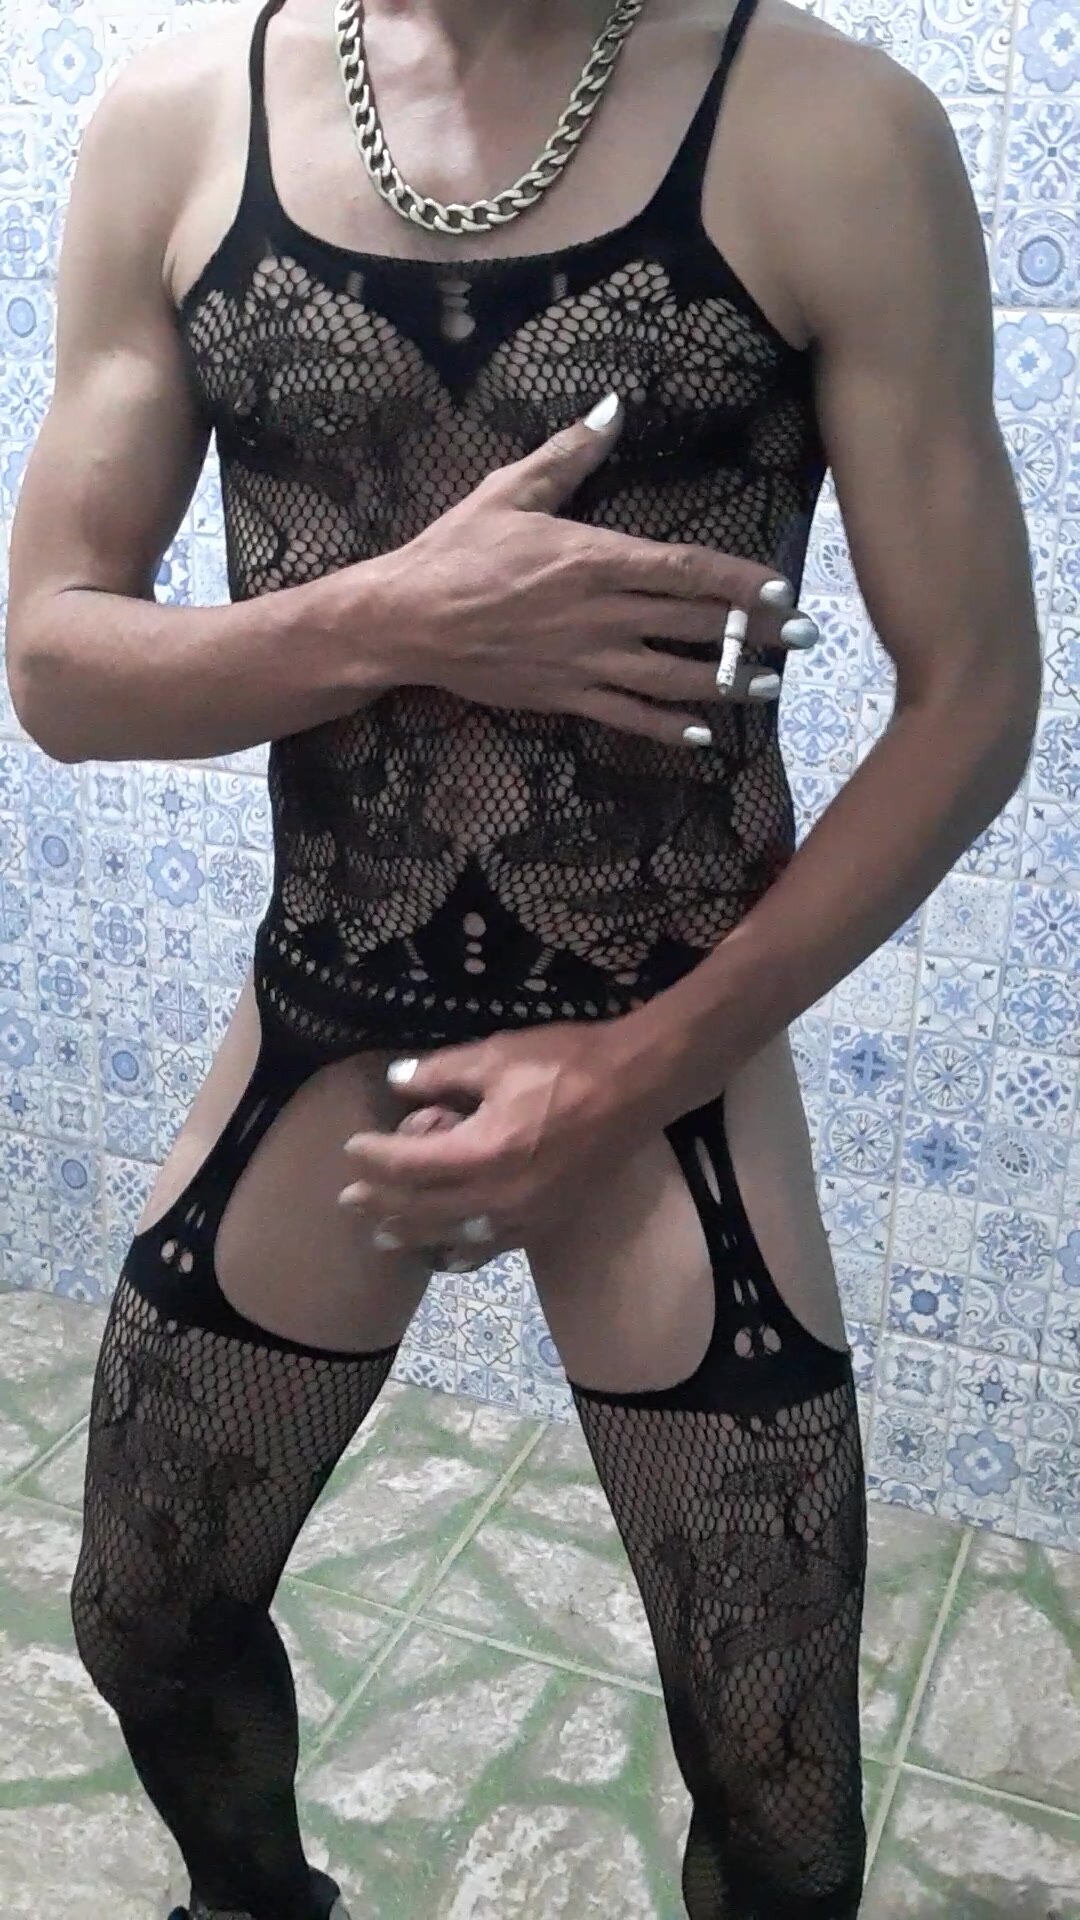 Boy with lingerie and silver nails smoking